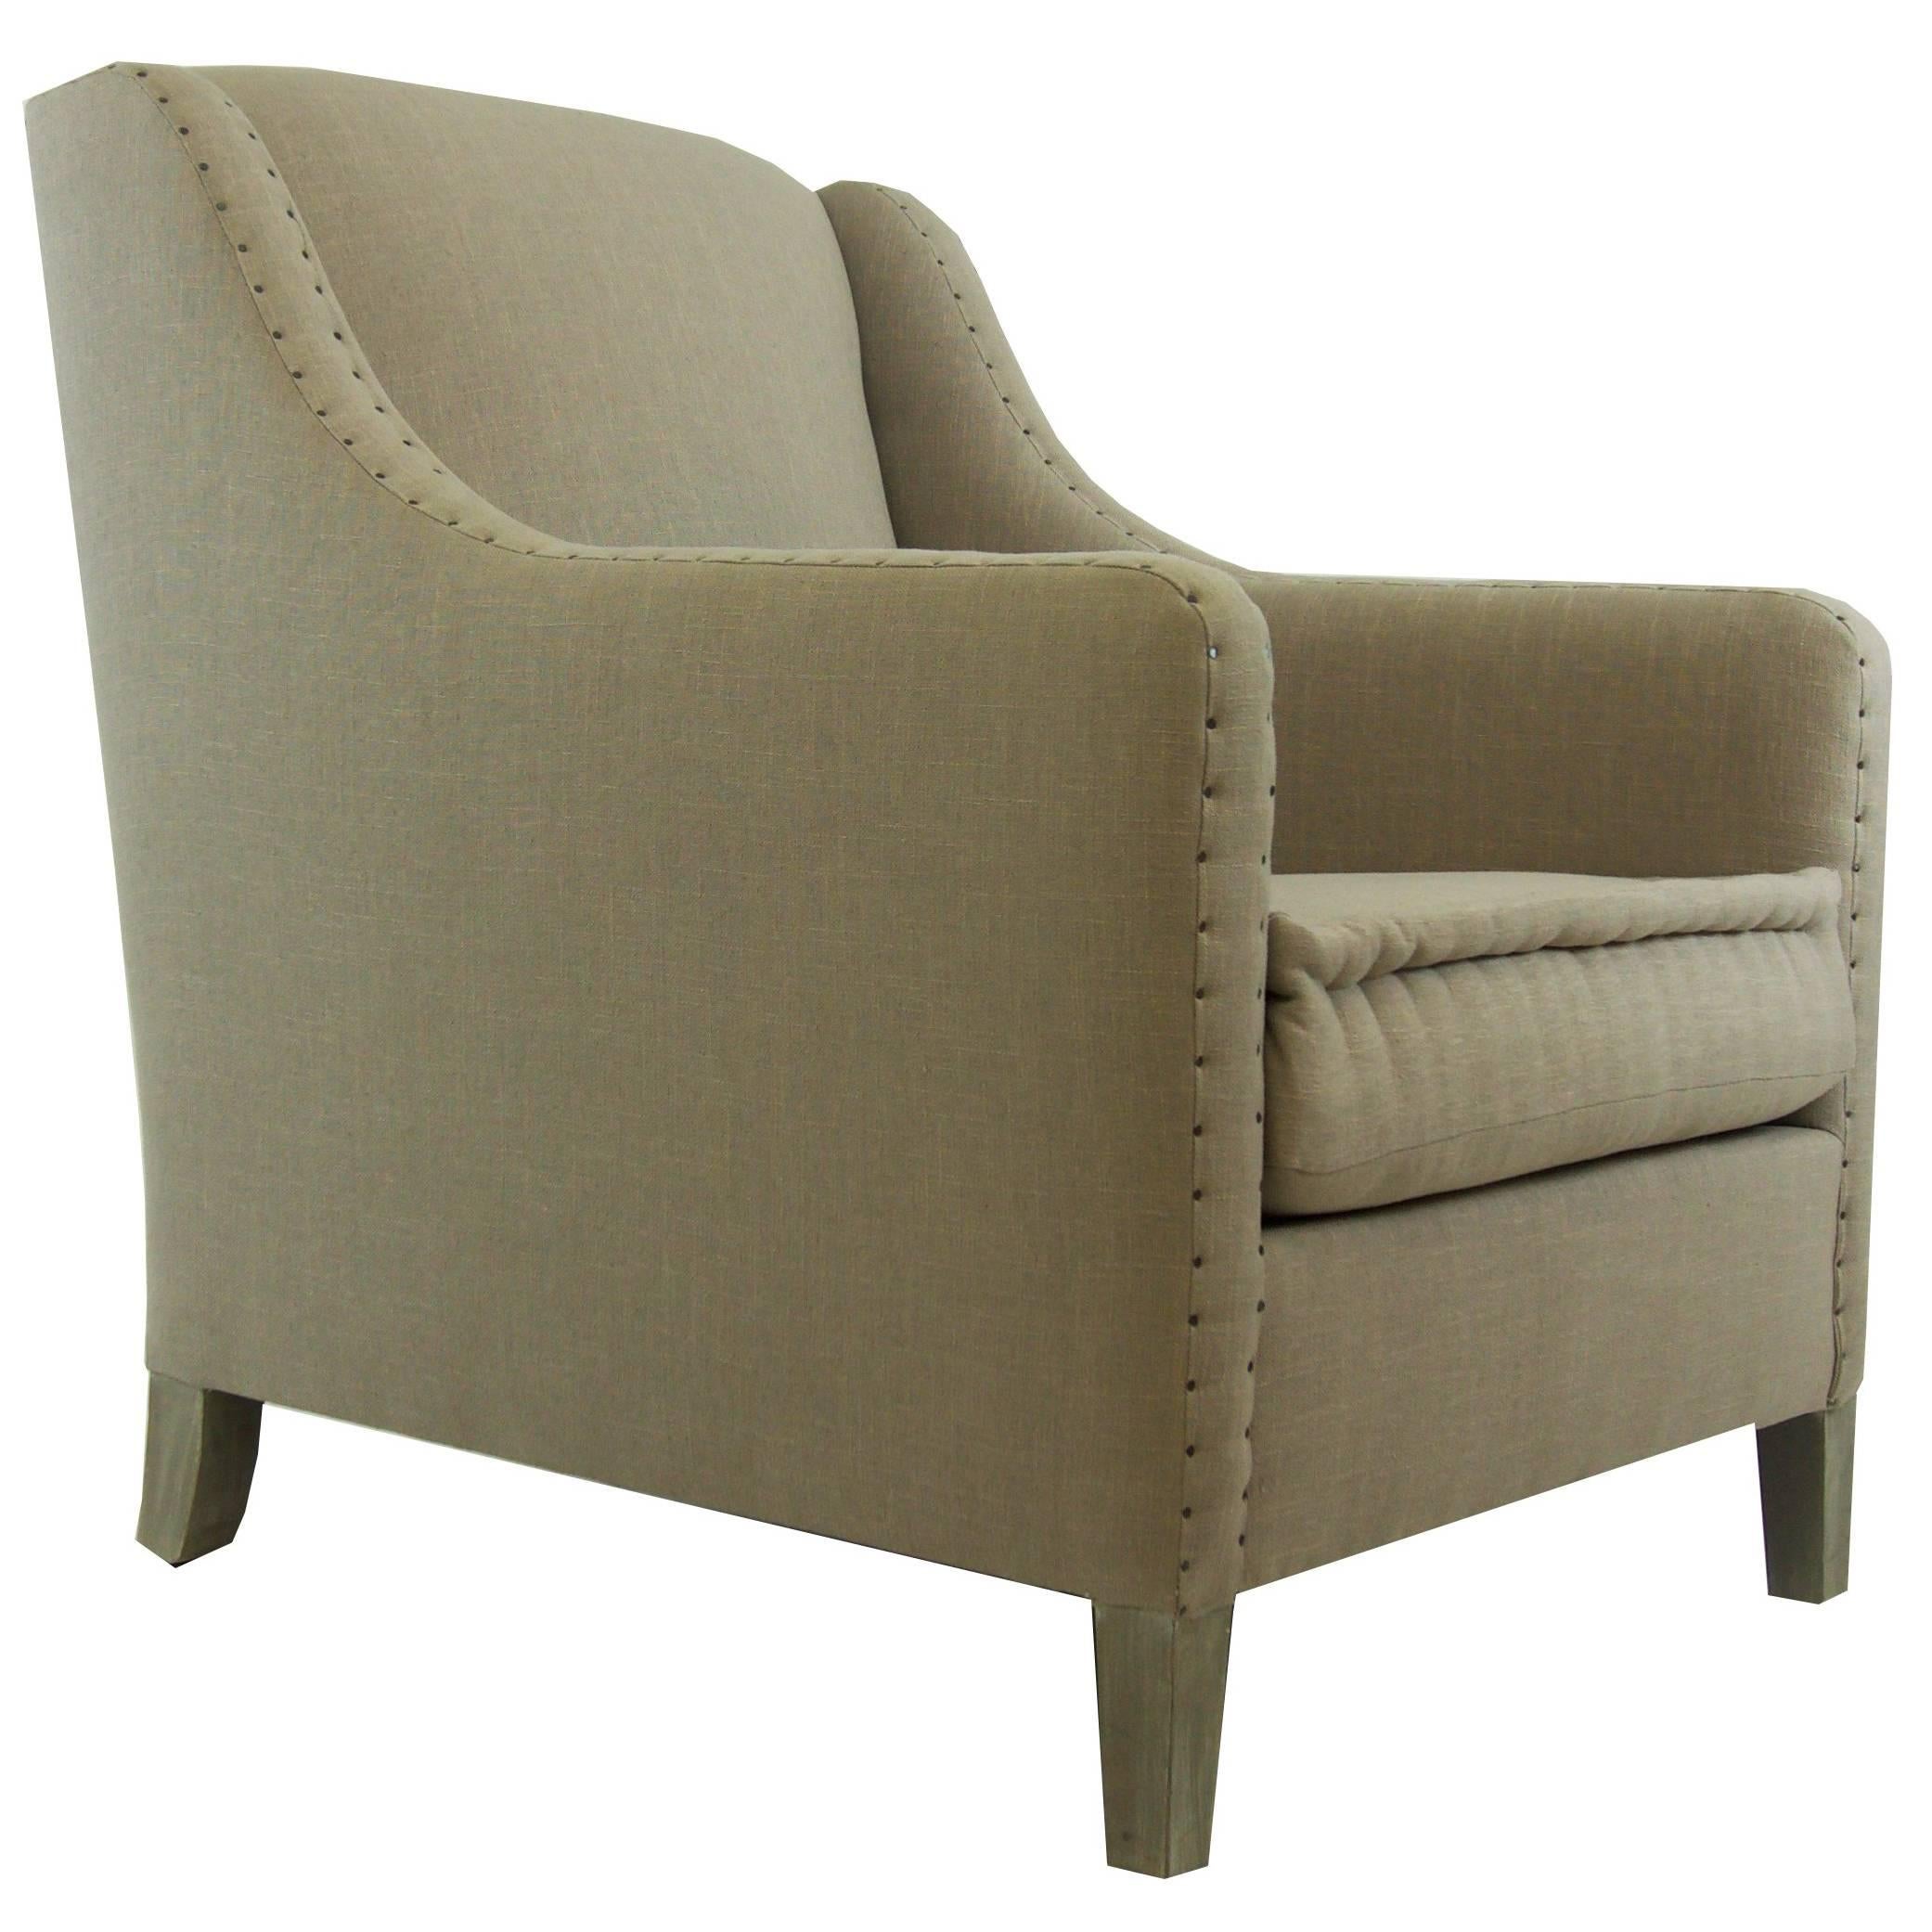 Upholstered Club Chair with Nailheads, Customizable